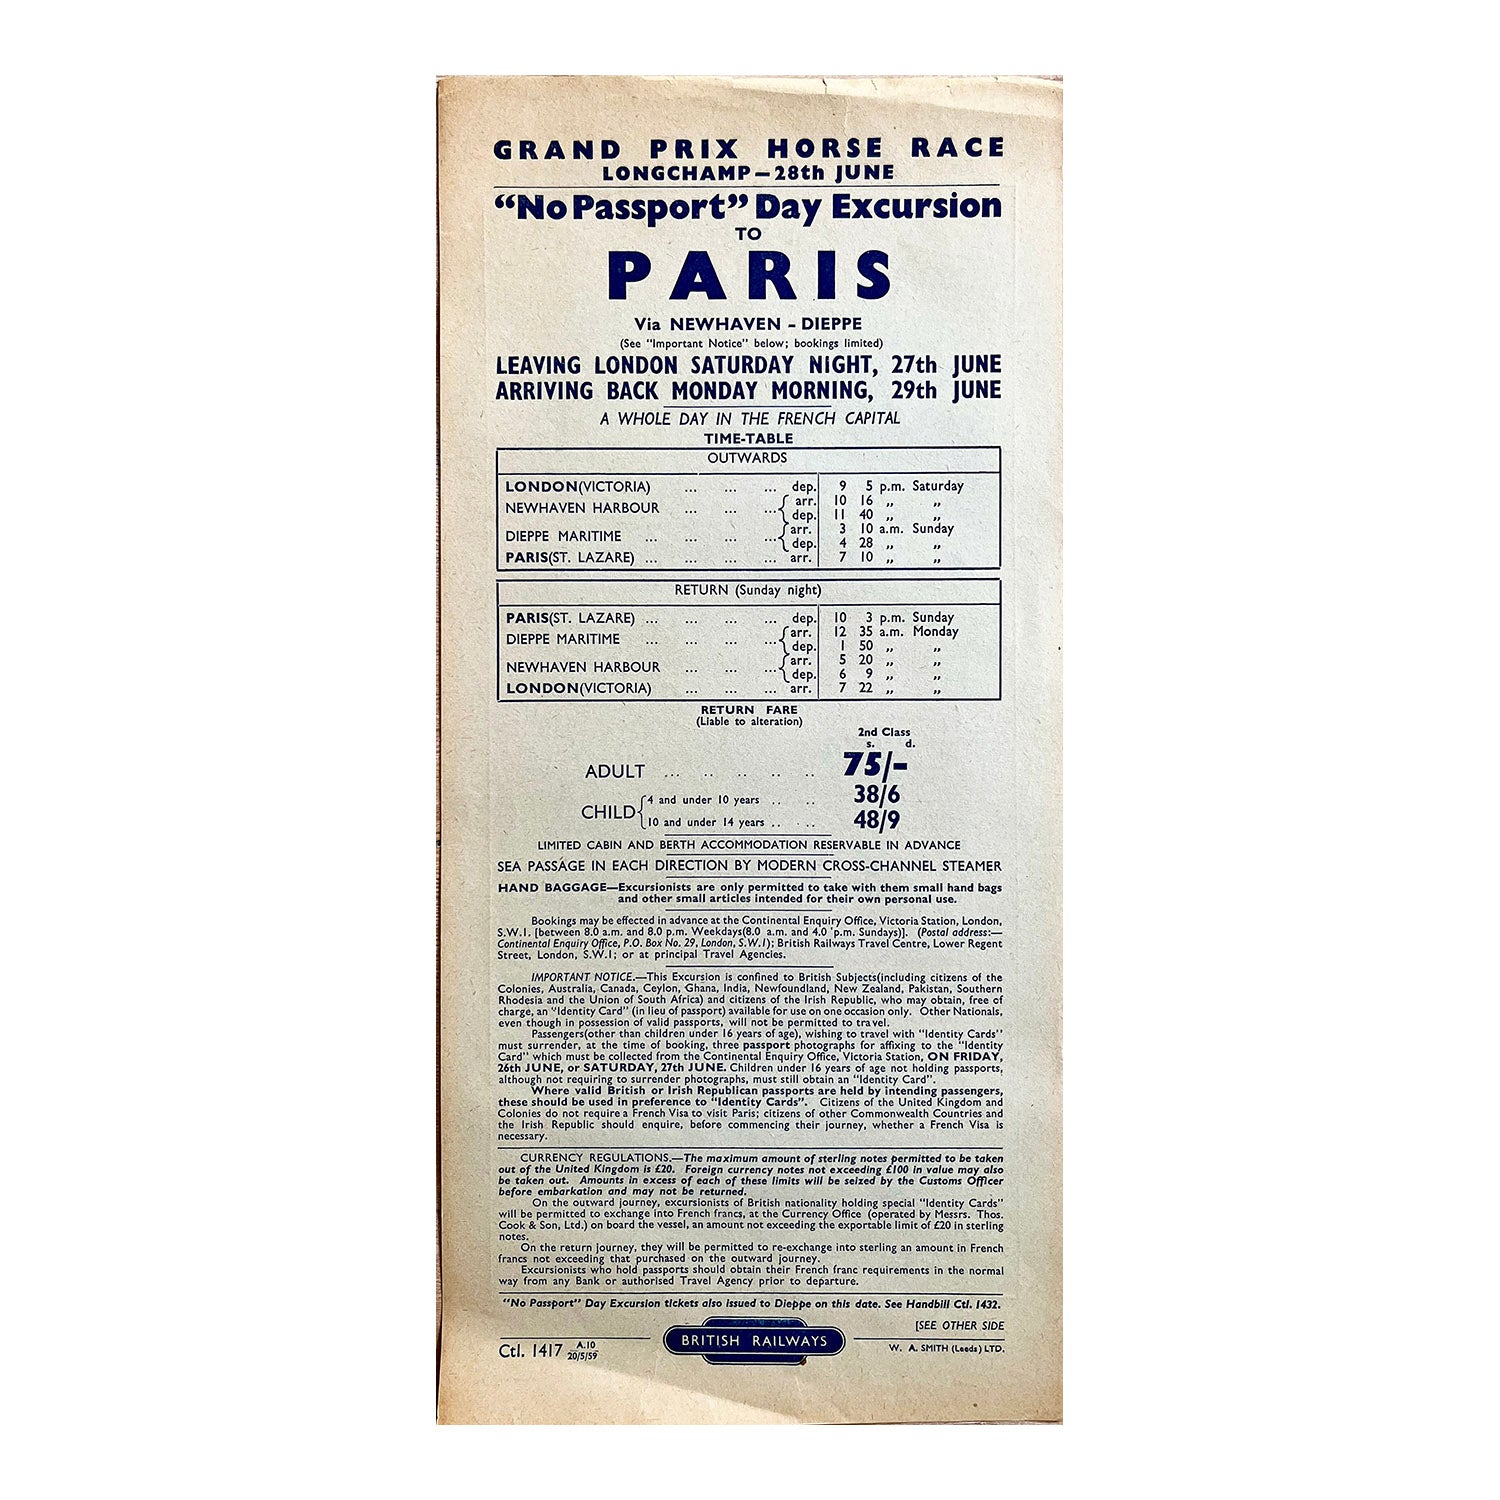 British Railways handbill advertising a trip from London to Paris to watch the Grand Prix Horse Race at Longchamp, 28 June 1958